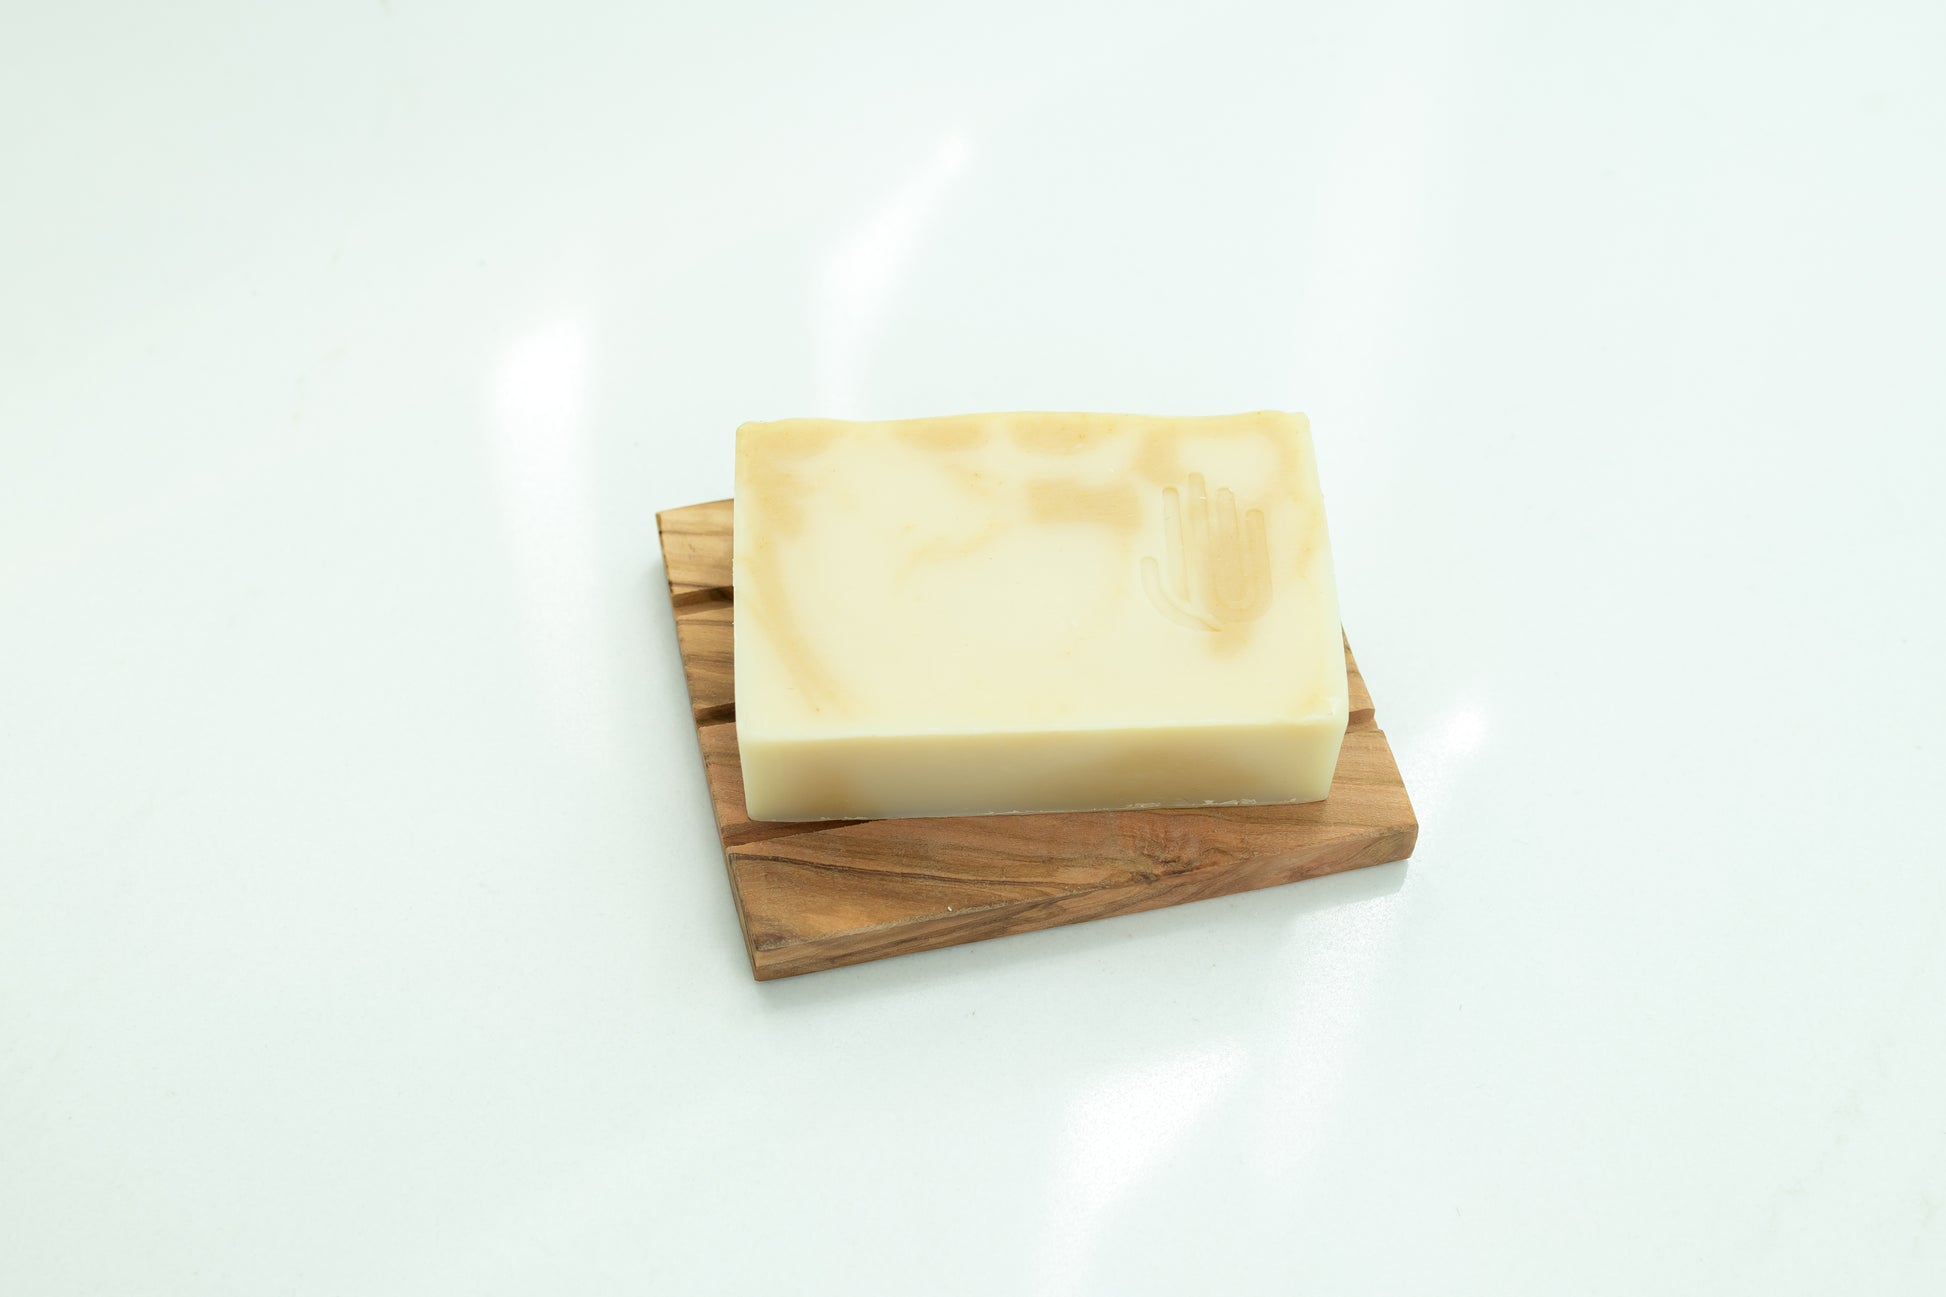 square white and yellow swirled soap placed on a wooden soap dish